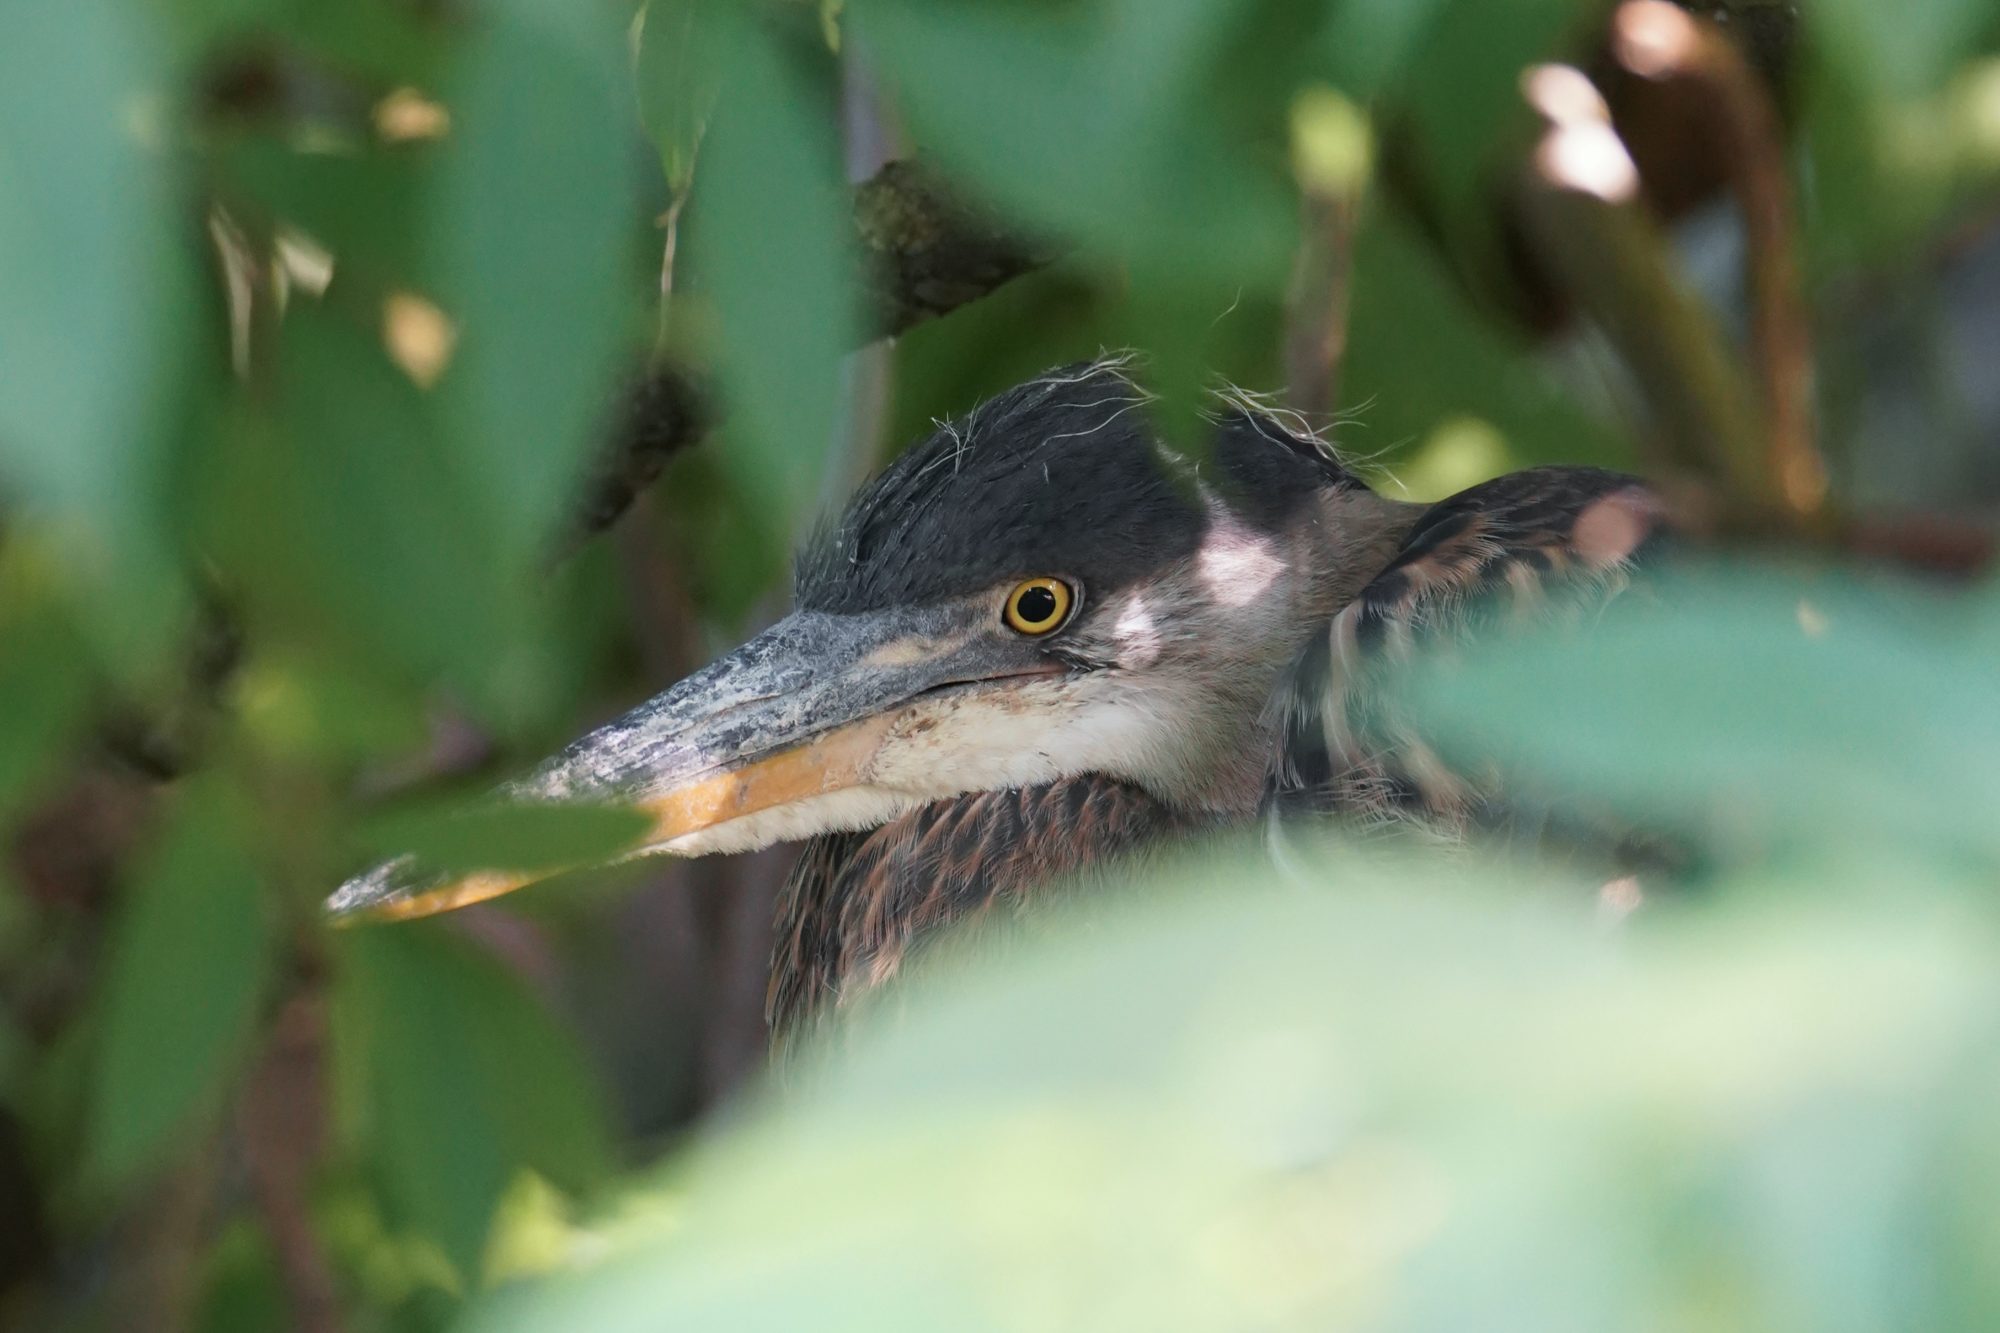 An immature Great Blue Heron hiding deep in a bush. Only its face is visible